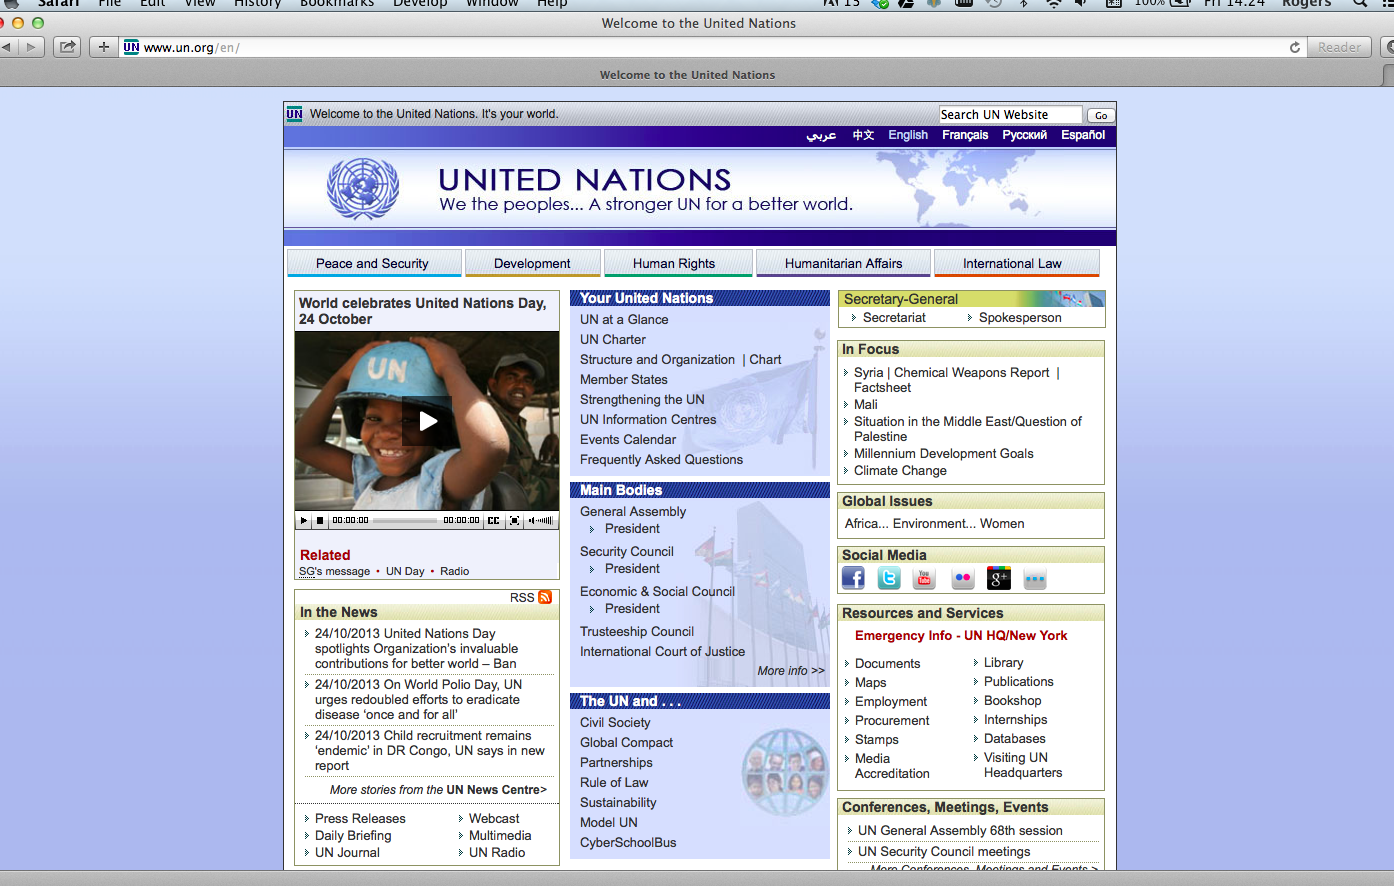 UN_homepage_2013-10-25_at_14.23.39.png